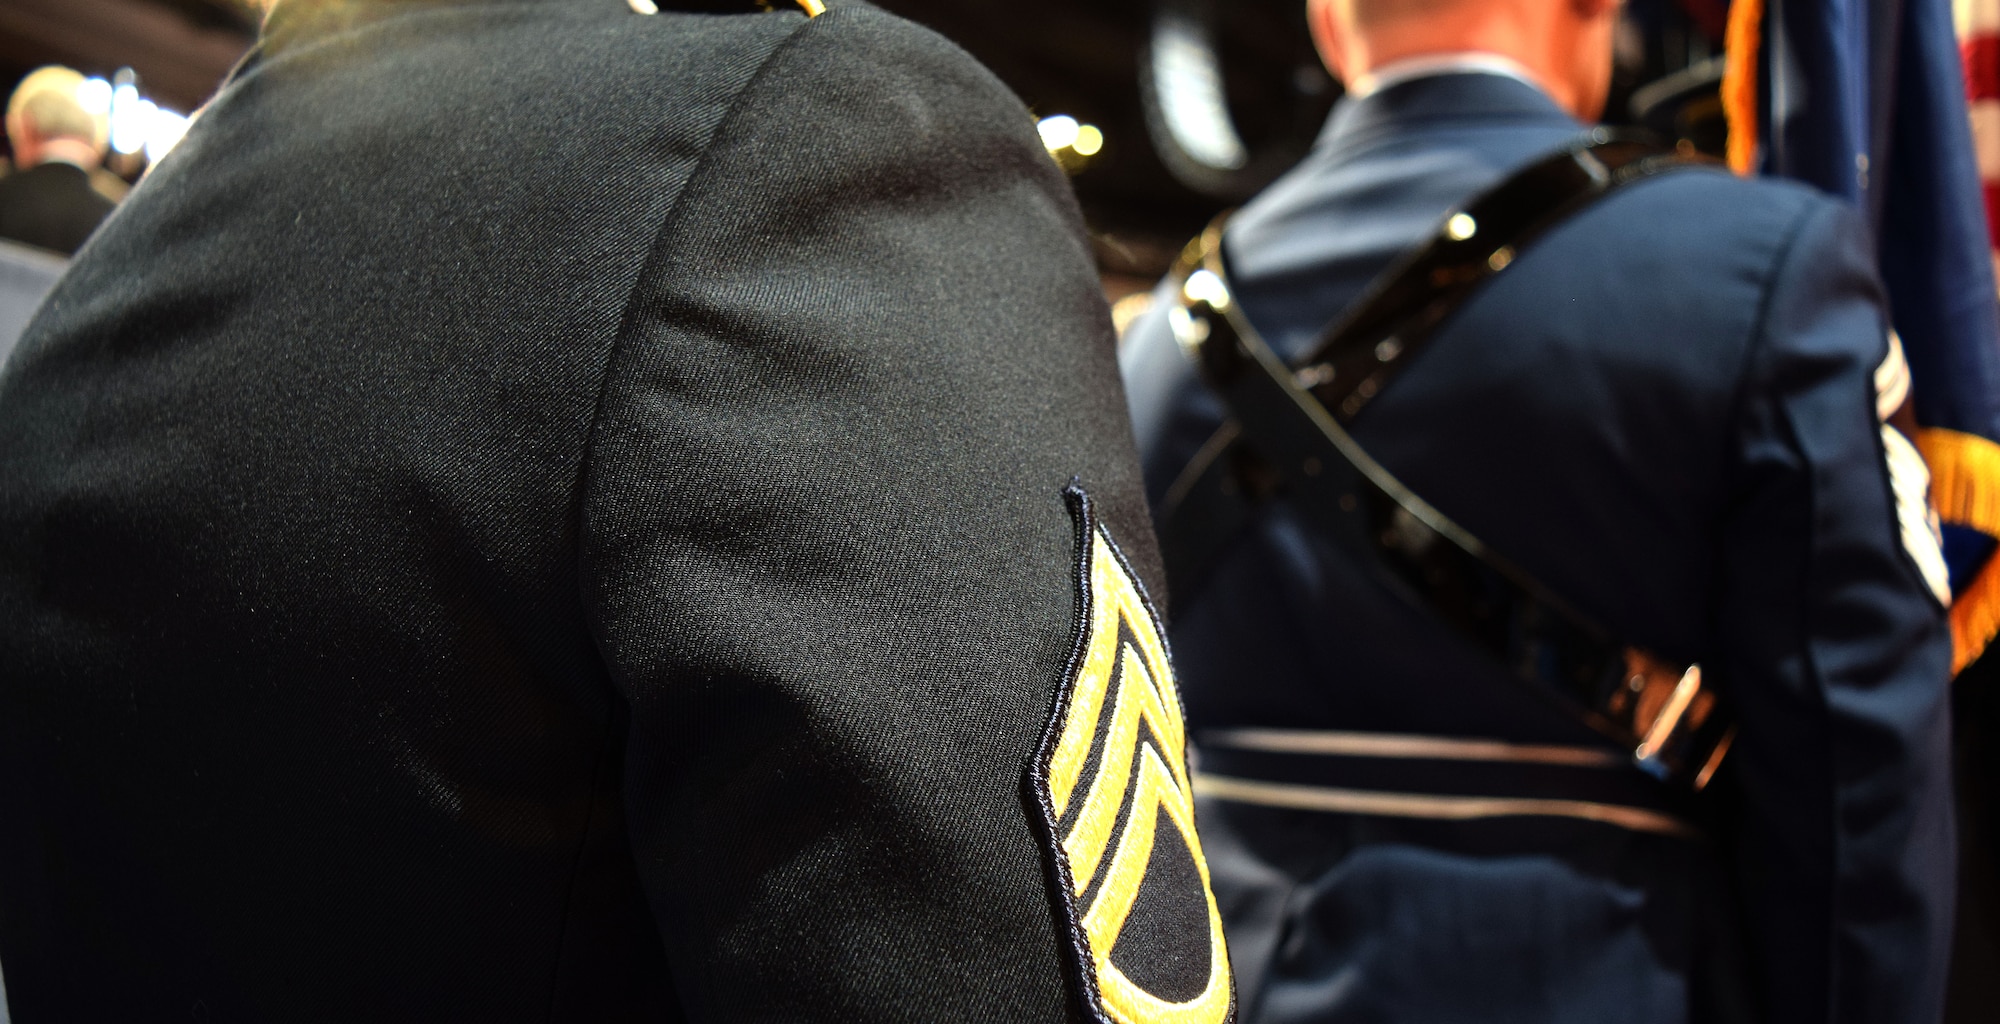 Await their debut at the Democratic National Convention at the Wells Fargo Center in Philadelphia, Pa. July 27, 2016, the black and blue dress uniforms of the Pennsylvania National Guard Honor Guard detail stand ready to present the colors before thousands of conventioneers. (U.S. Air National Guard photo by Master Sgt. Chris Botzum)